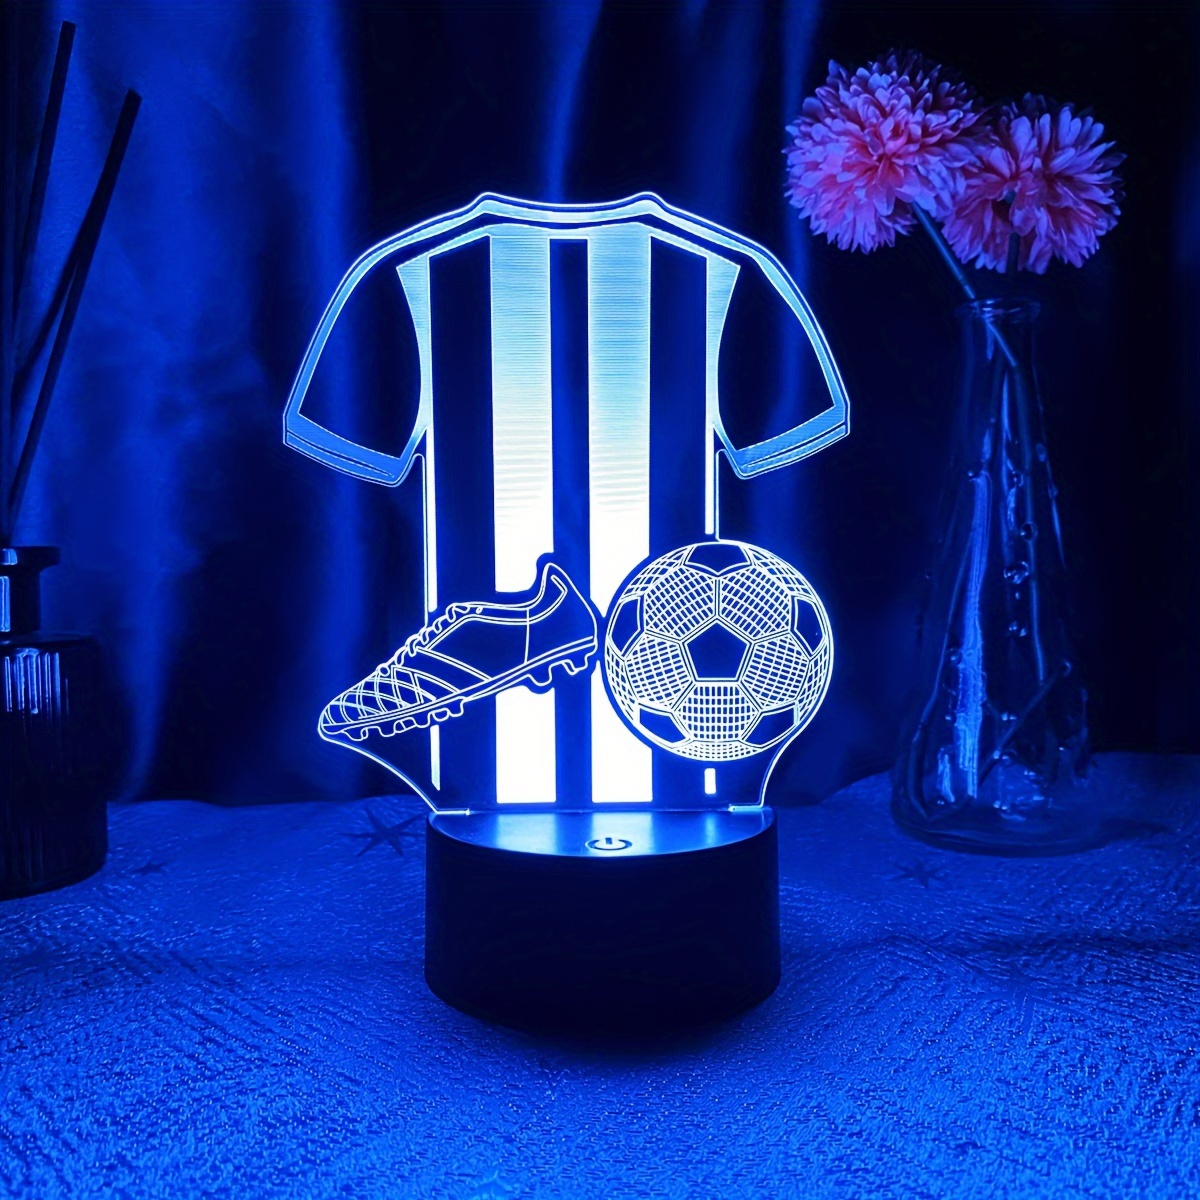 

goal-scoring" 3d Soccer Gear Led Night Light - Football Jersey & Cleats Design, Usb Powered Ambient Lamp, Perfect Gift For Soccer Fans